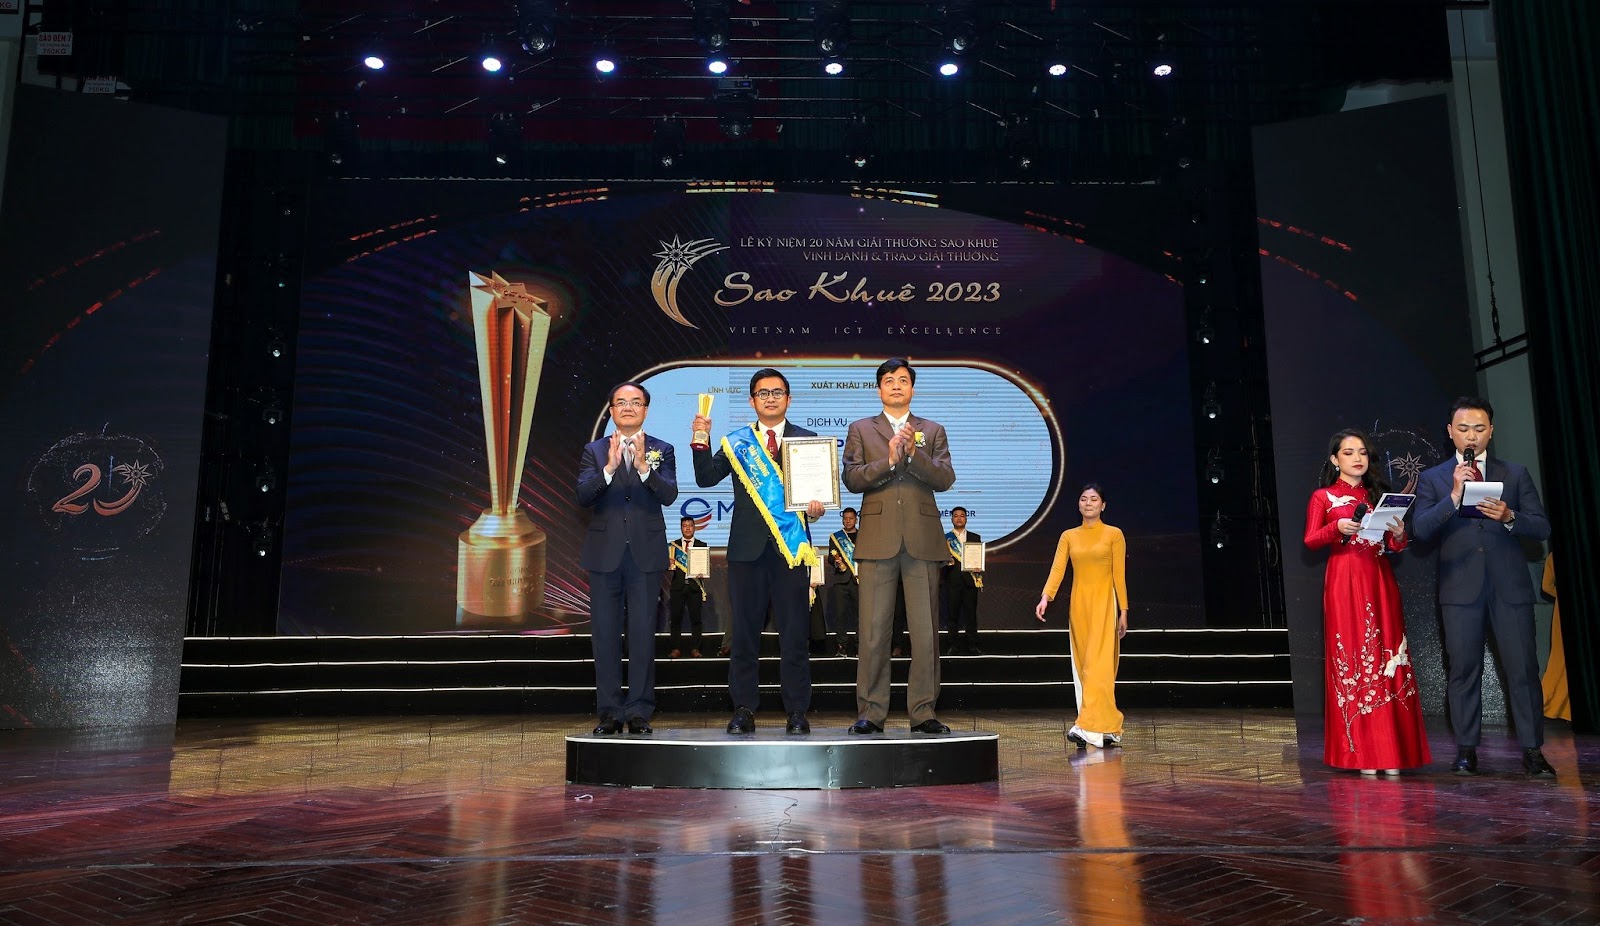 MOR Software is honored to receive the Sao Khue 2023 award